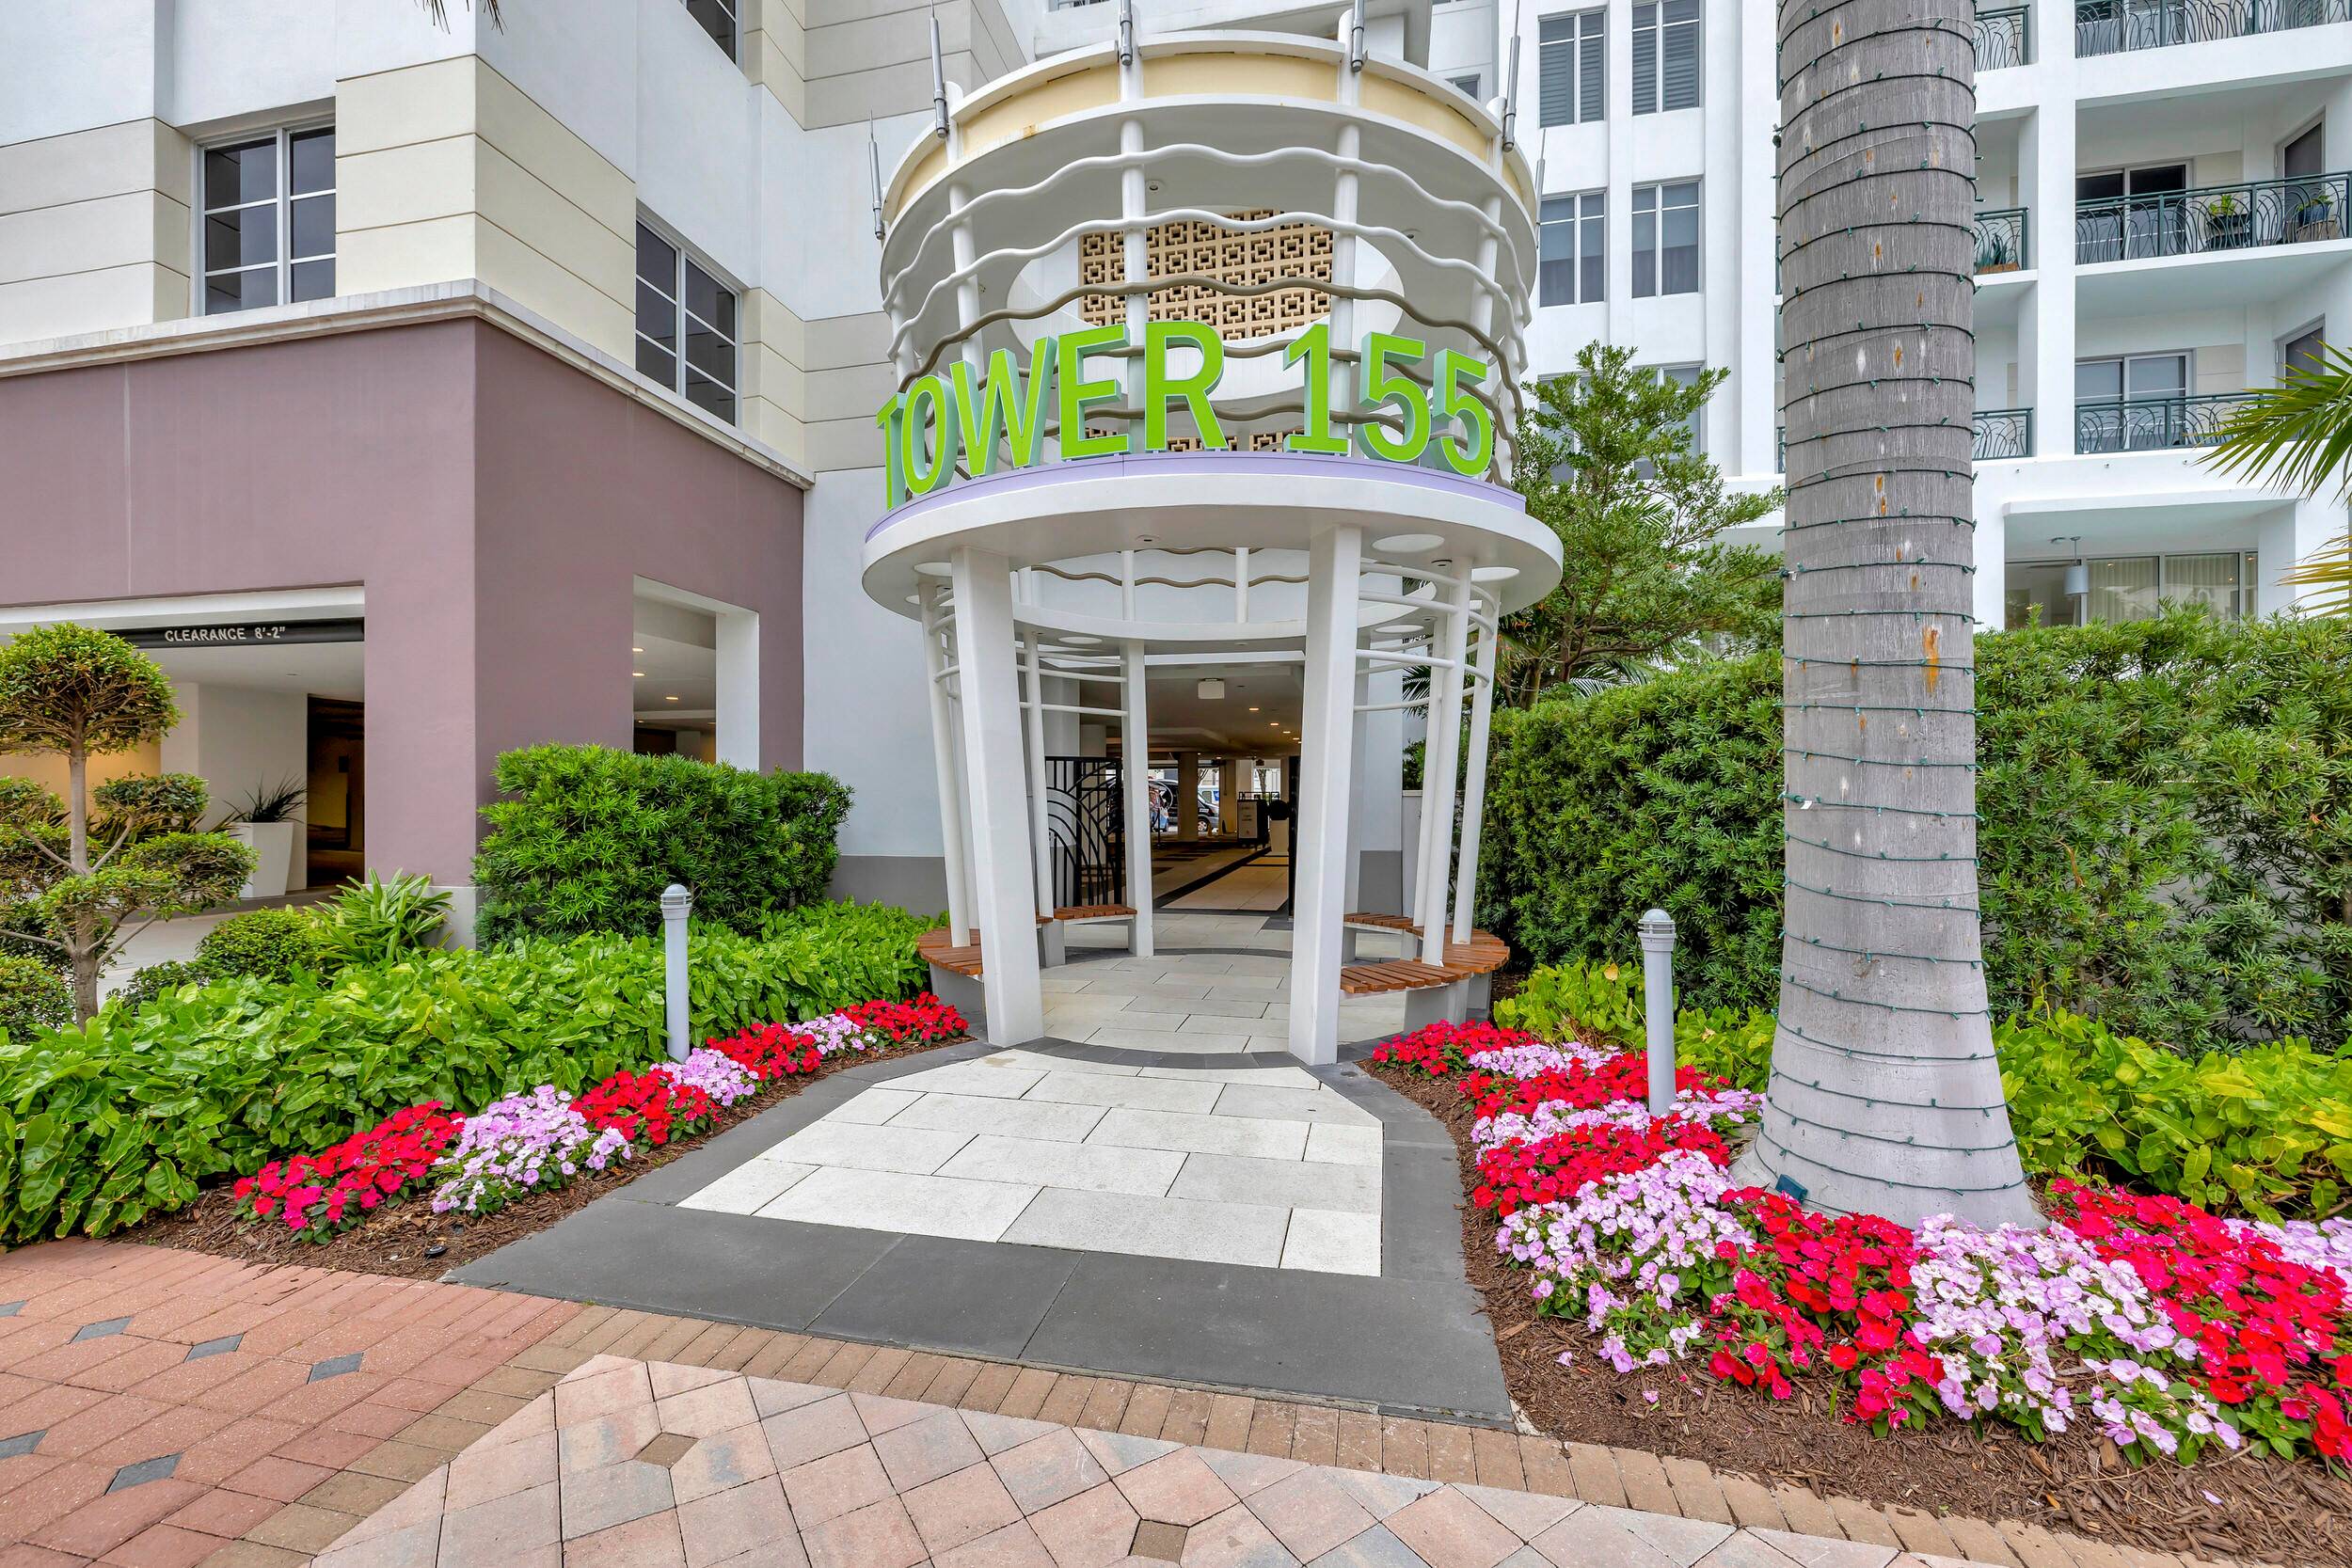 If you have been searching for new ultra luxury living in downtown Boca with direct ocean views from this corner unit, Tower 155 is the place for you.